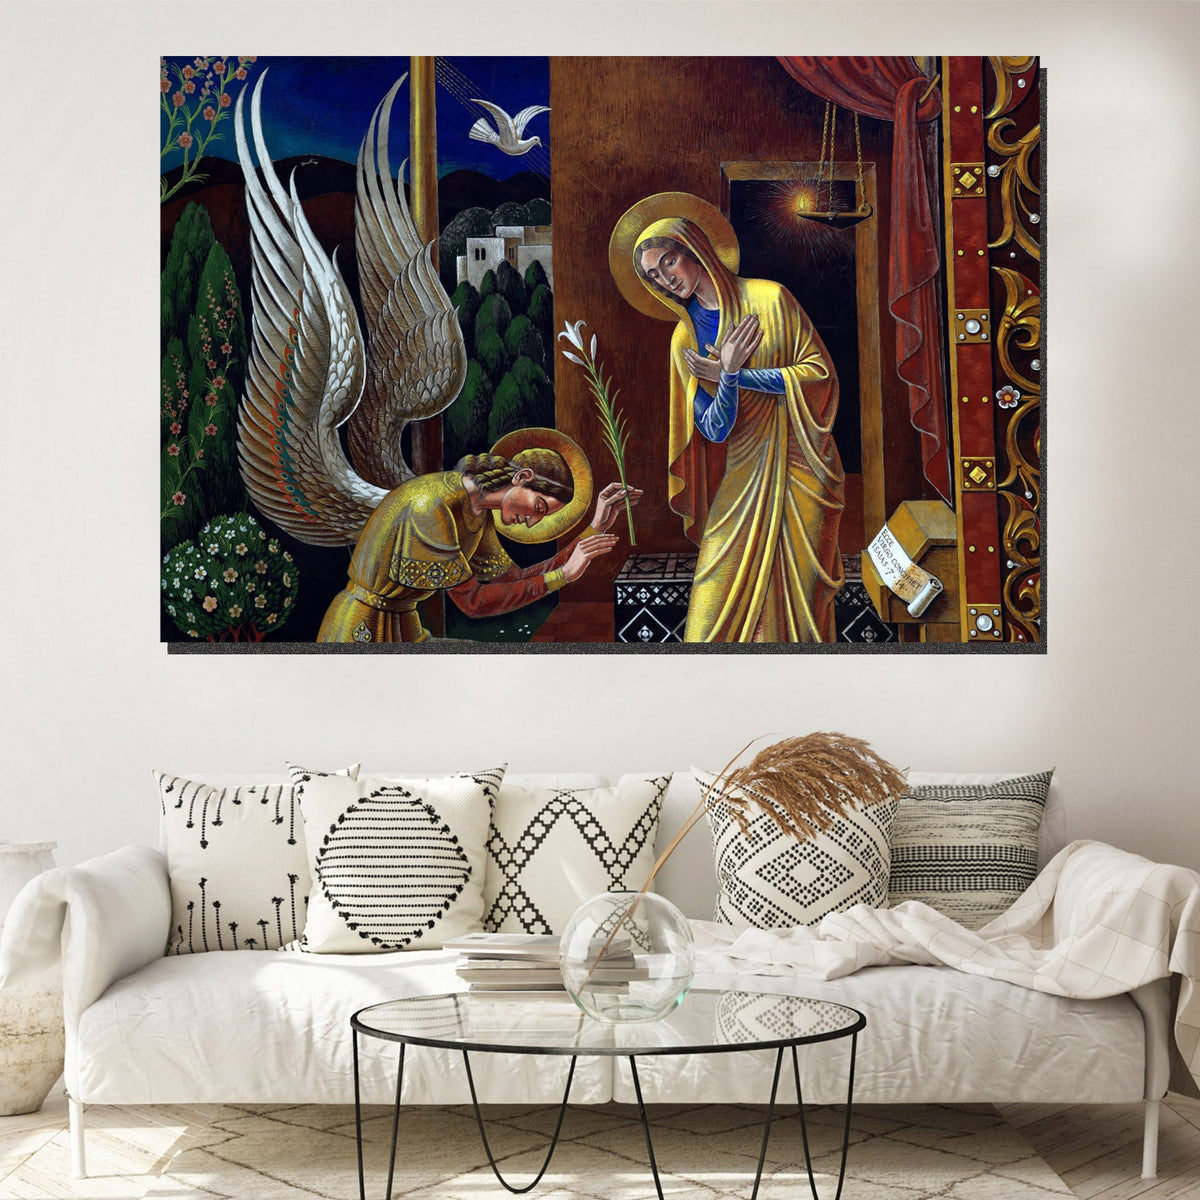 https://cdn.shopify.com/s/files/1/0387/9986/8044/products/TheAnnunciationofMaryCanvasArtprintStretched-2.jpg